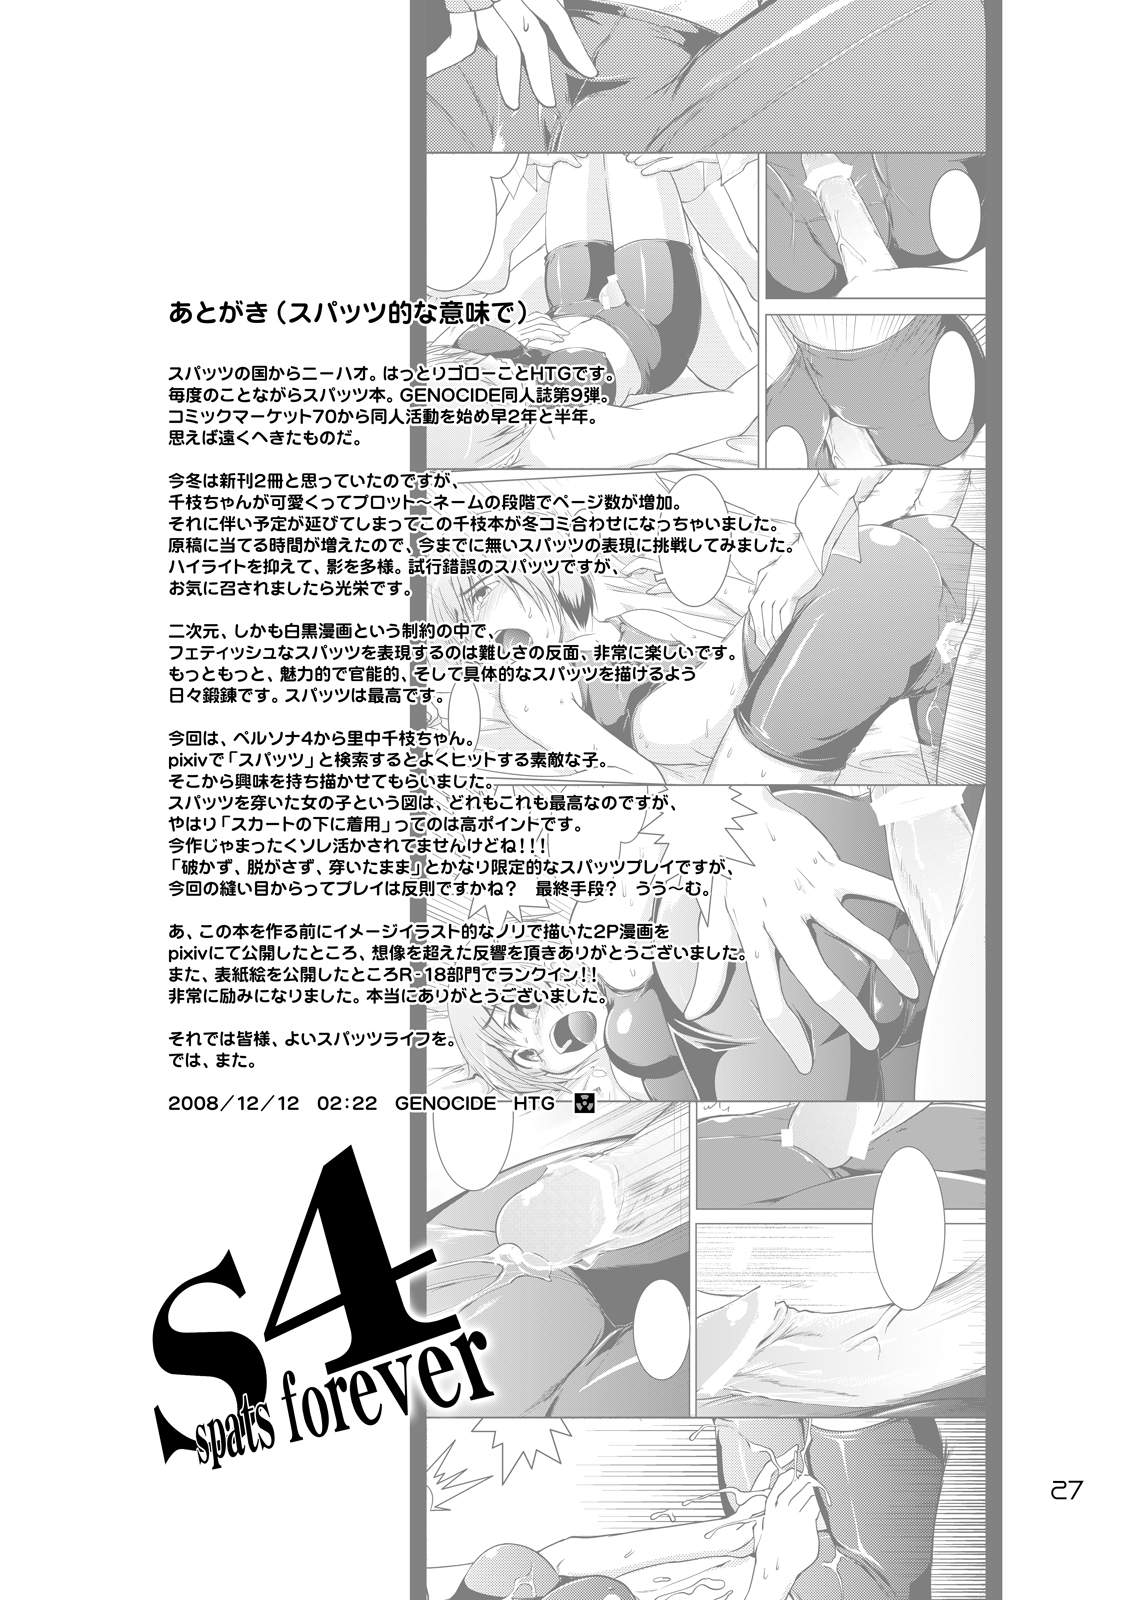 [GENOCIDE (はっとりゴロー)] S4 spats forever (ペルソナ4) [DL版]